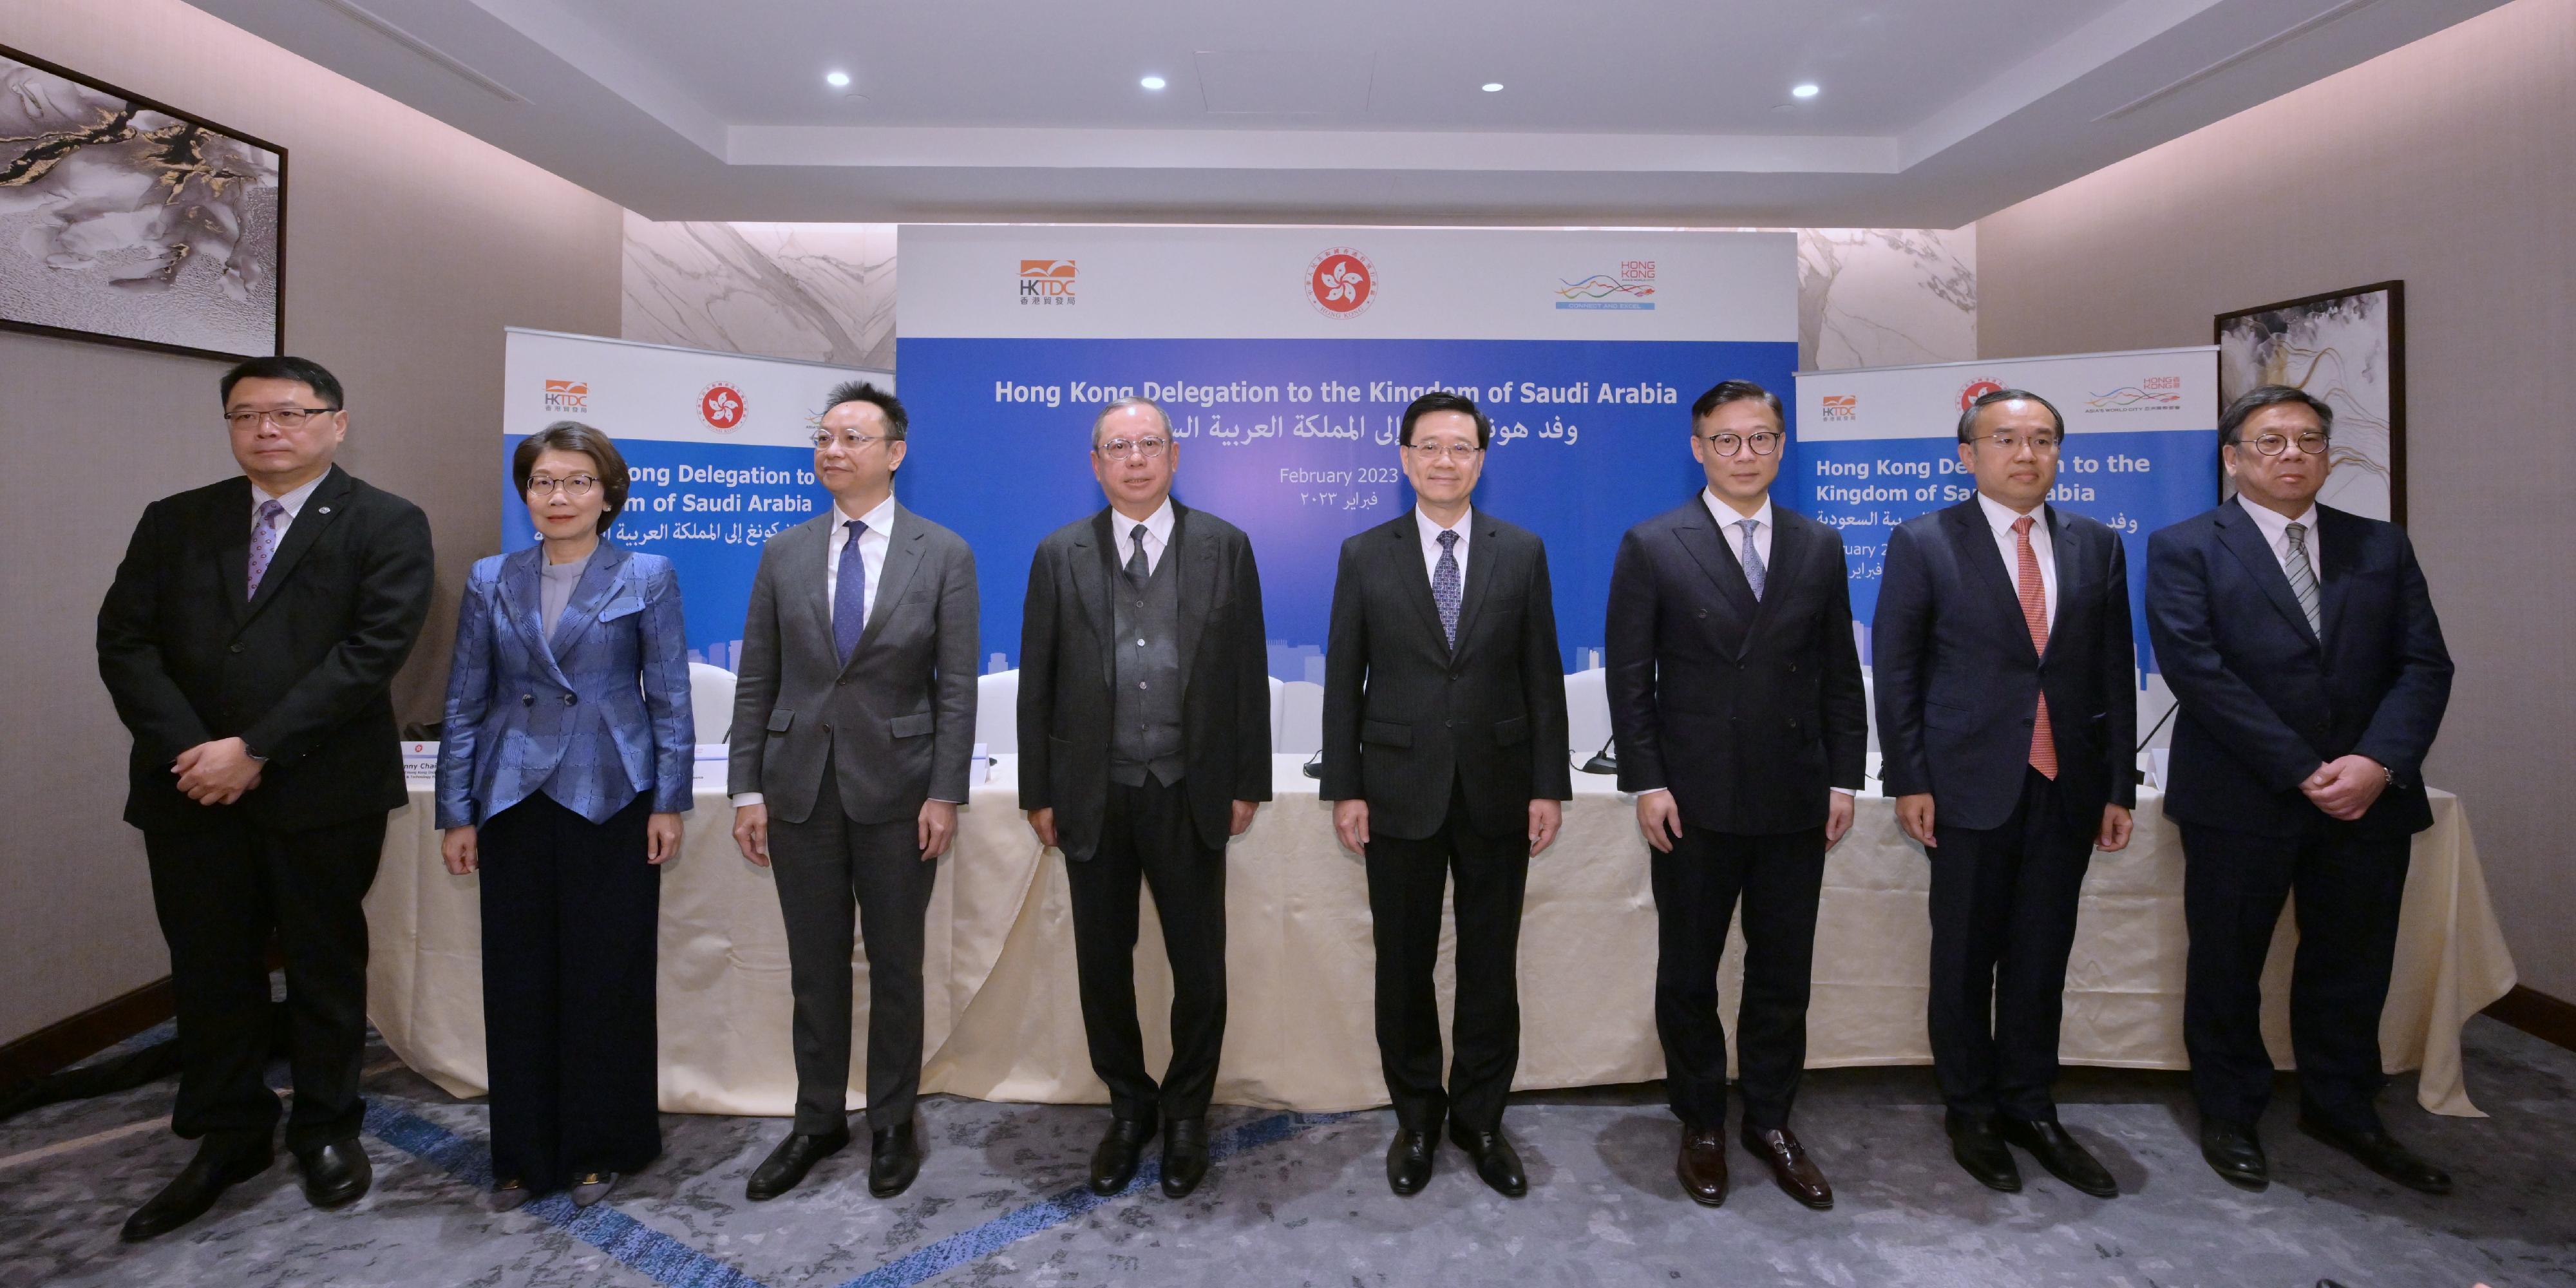 The Chief Executive, Mr John Lee (fourth right), together with the Deputy Secretary for Justice, Mr Cheung Kwok-kwan (third right); the Secretary for Financial Services and the Treasury, Mr Christopher Hui (second right); the Secretary for Commerce and Economic Development, Mr Algernon Yau (first right); the Chairman of the Hong Kong Trade Development Council, Dr Peter Lam (fourth left); Deputy Chief Executive of the Hong Kong Monetary Authority, Mr Darryl Chan (third left); the Chairman of the Hong Kong General Chamber of Commerce, Ms Betty Yuen (second left) and the Chairman of Hong Kong Science & Technology Parks Corporation, Dr Sunny Chai (first left) meets the media in Riyadh, Saudi Arabia, today (February 5, Riyadh time).